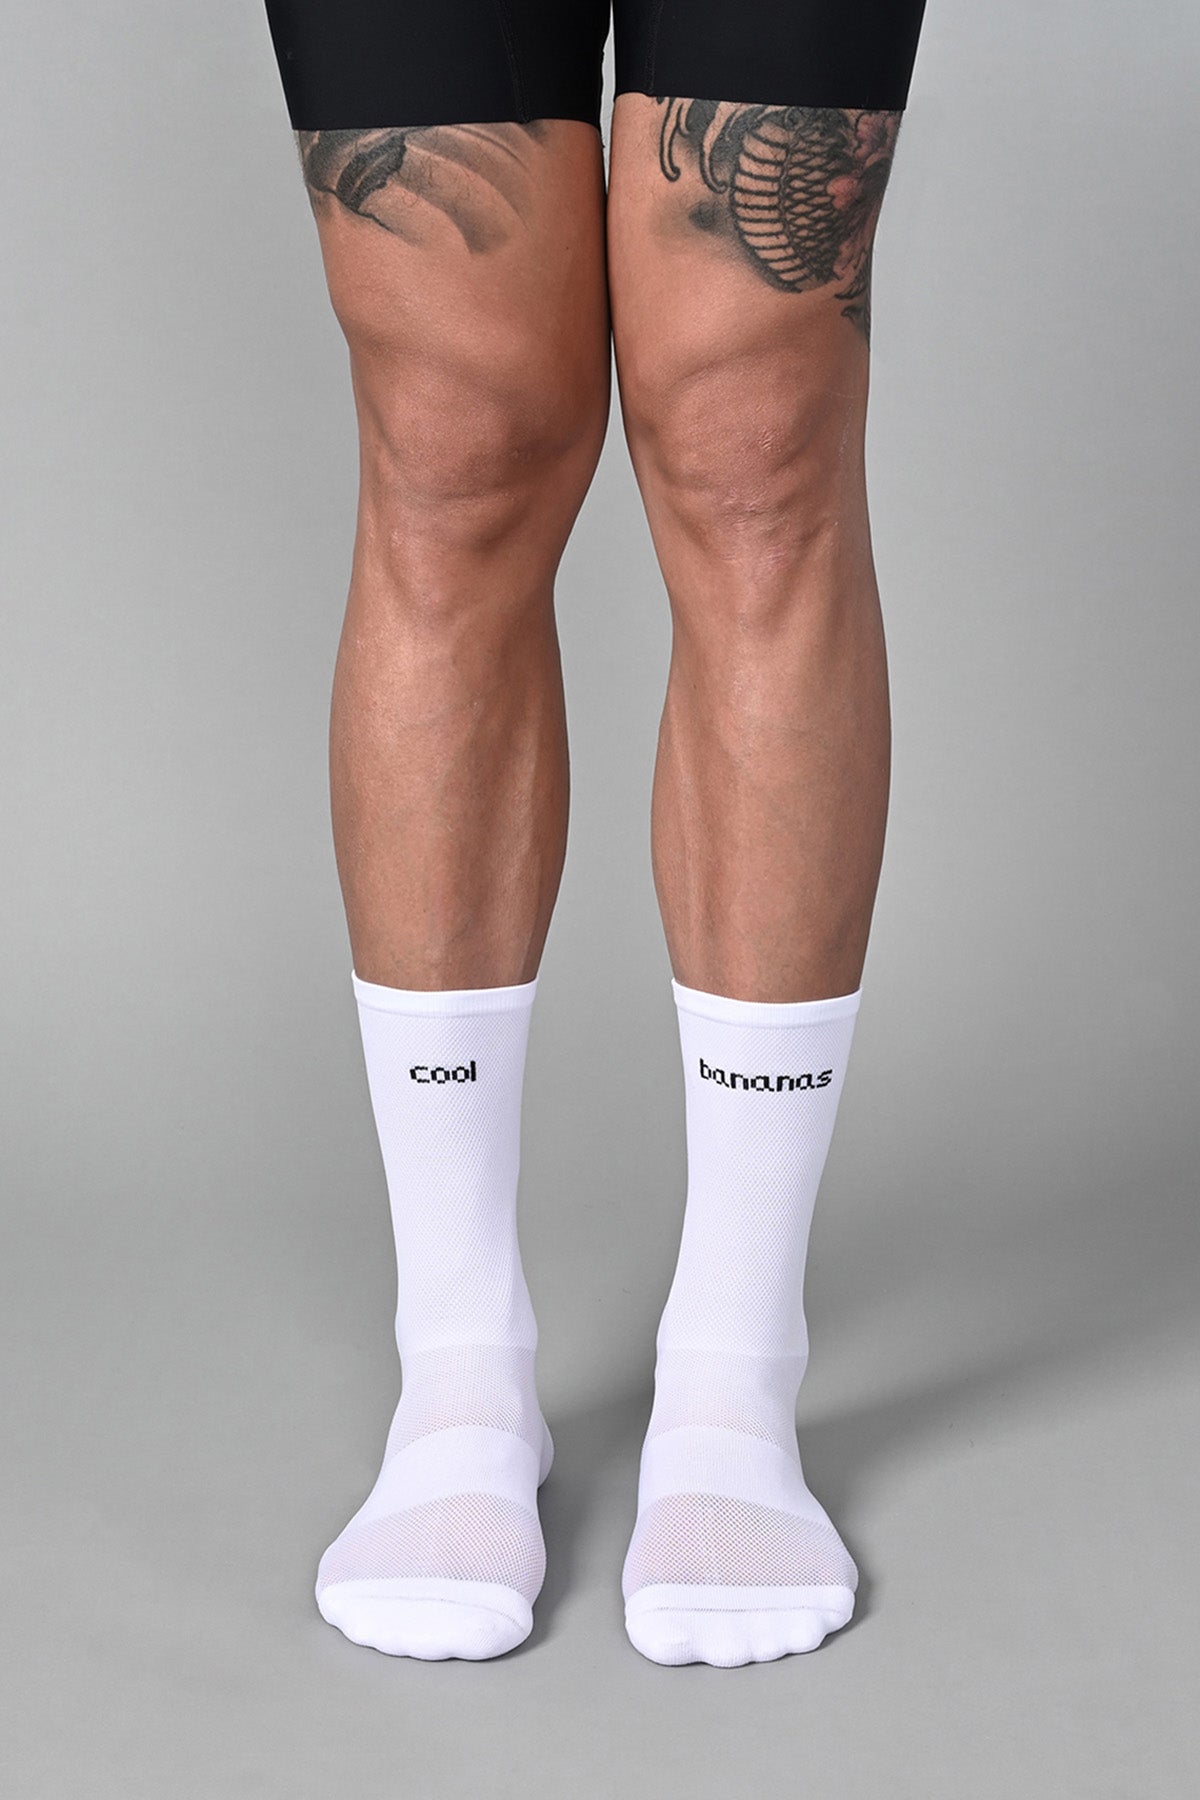 COOL BANANAS - WHITE FRONT | BEST CYCLING SOCKS